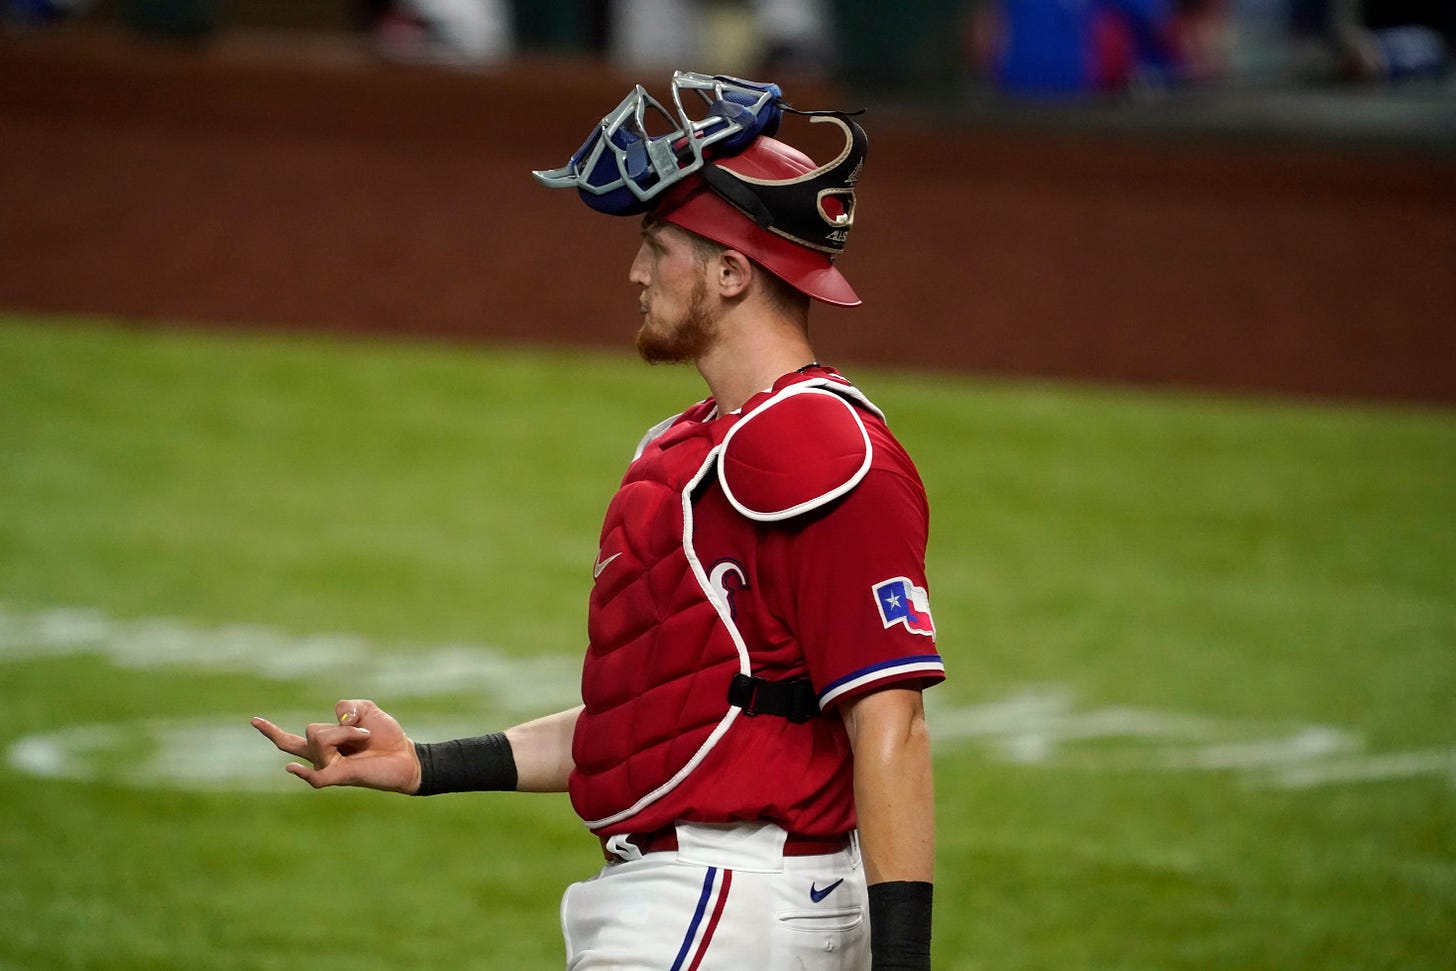 Texas Rangers won't let prospect Sam Huff catch in 2021, so a big